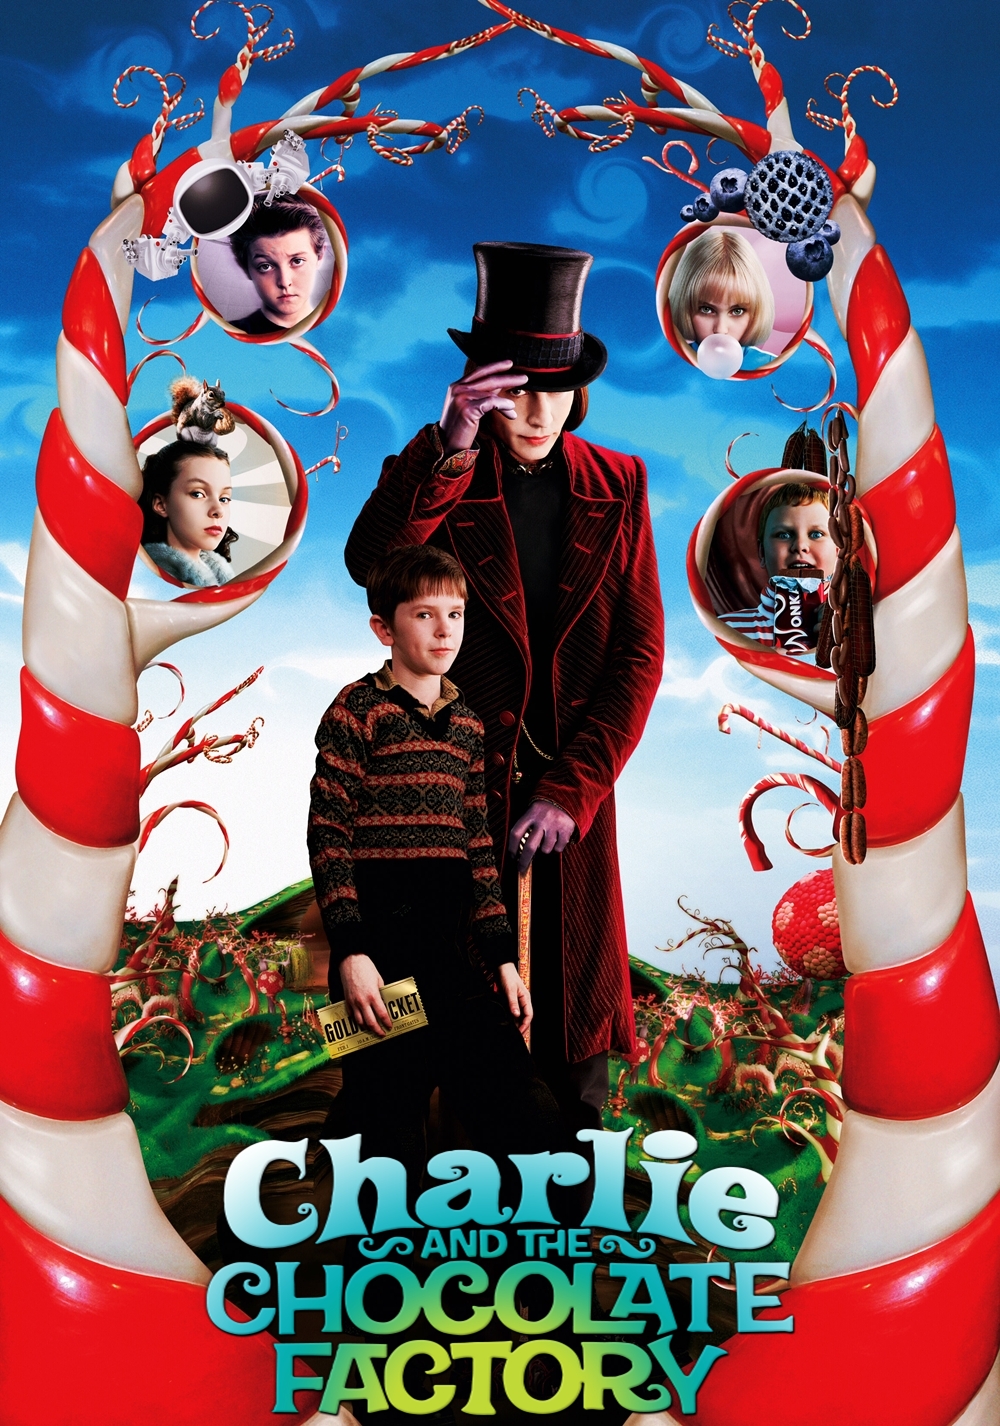 HQ Charlie And The Chocolate Factory Wallpapers | File 1197.71Kb